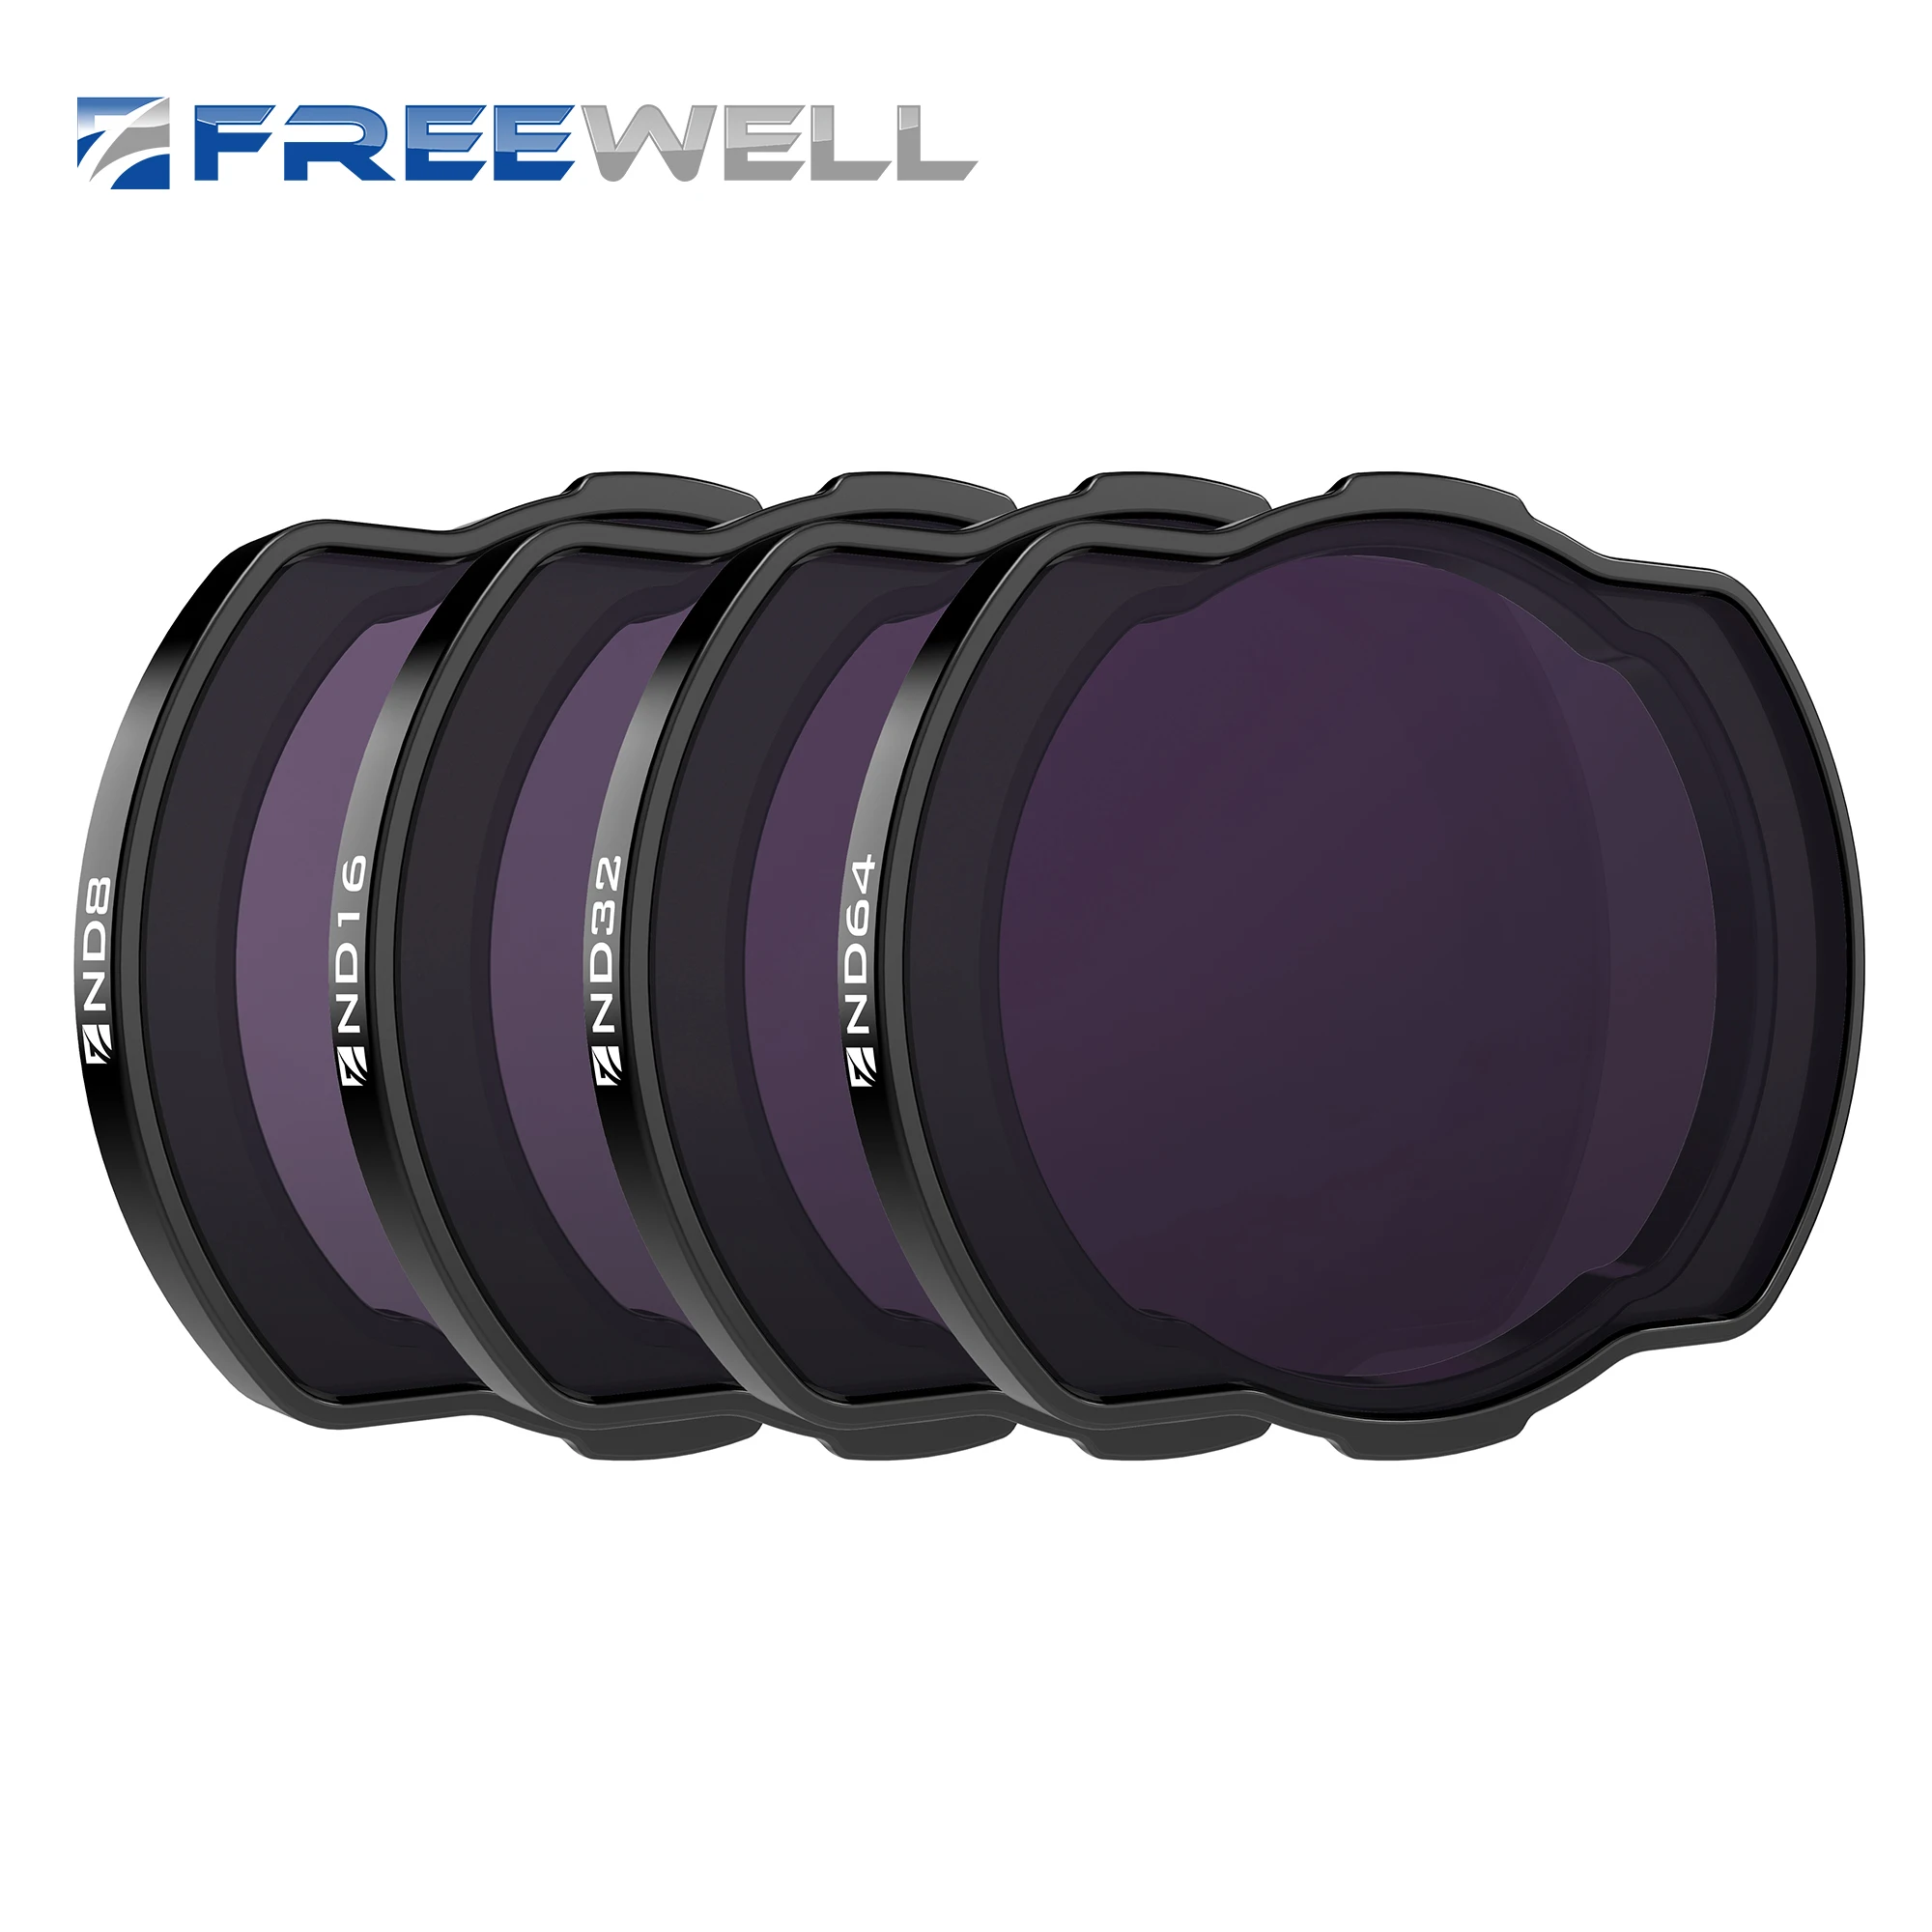 freewell-standard-day-paquete-de-4-filtros-nd8-nd16-nd32-nd64-compatibles-con-dji-avata-drone-o3-air-unit